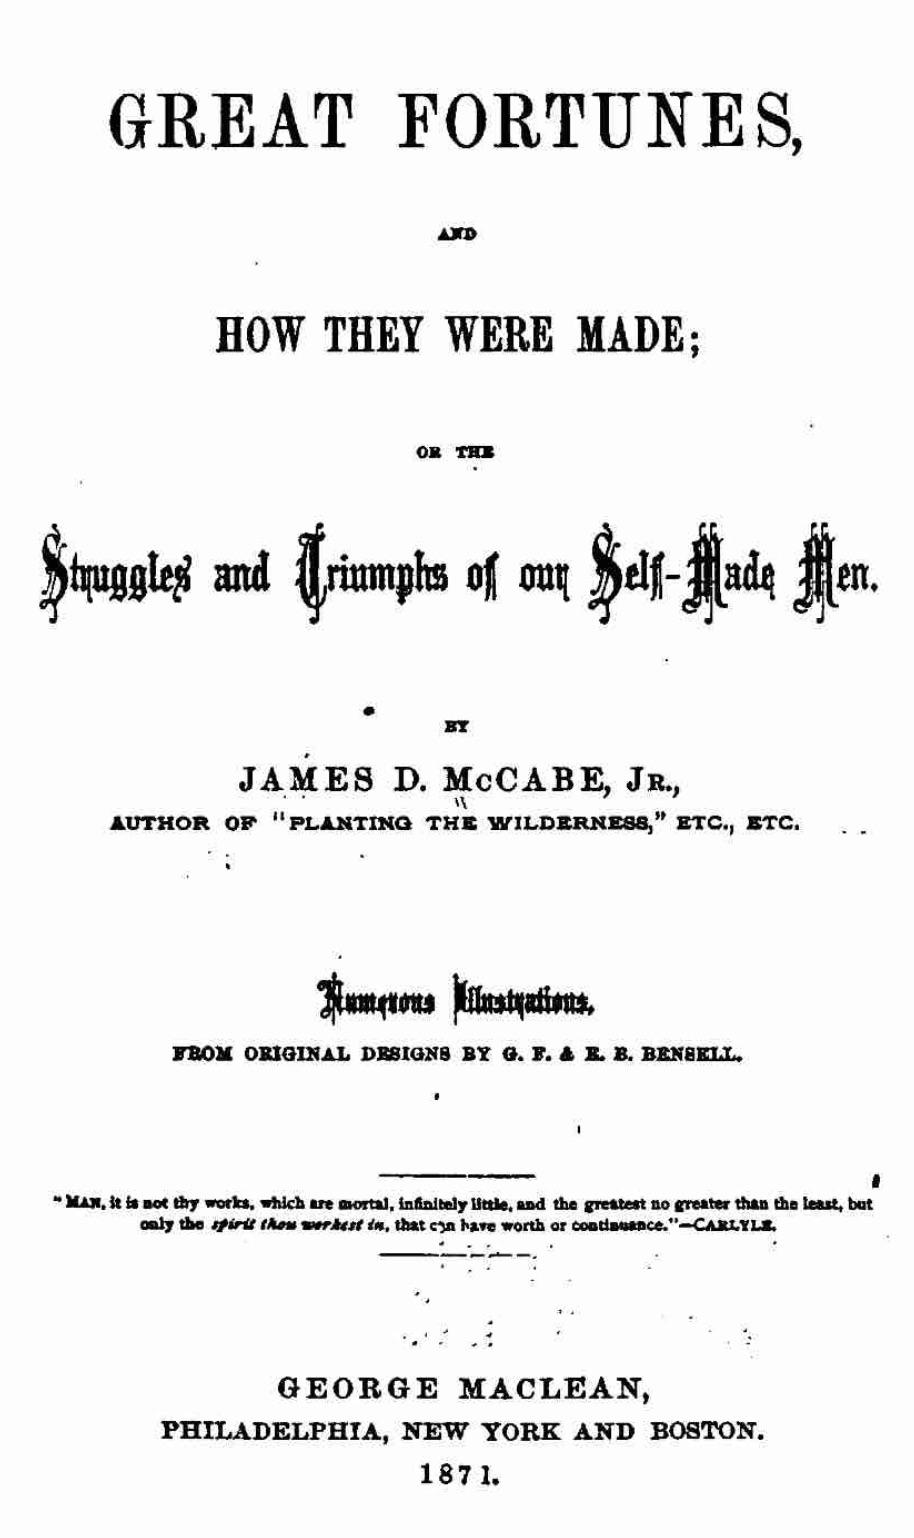 Great Fortunes, and How They Were Made (1870) by James Dabney McCabe